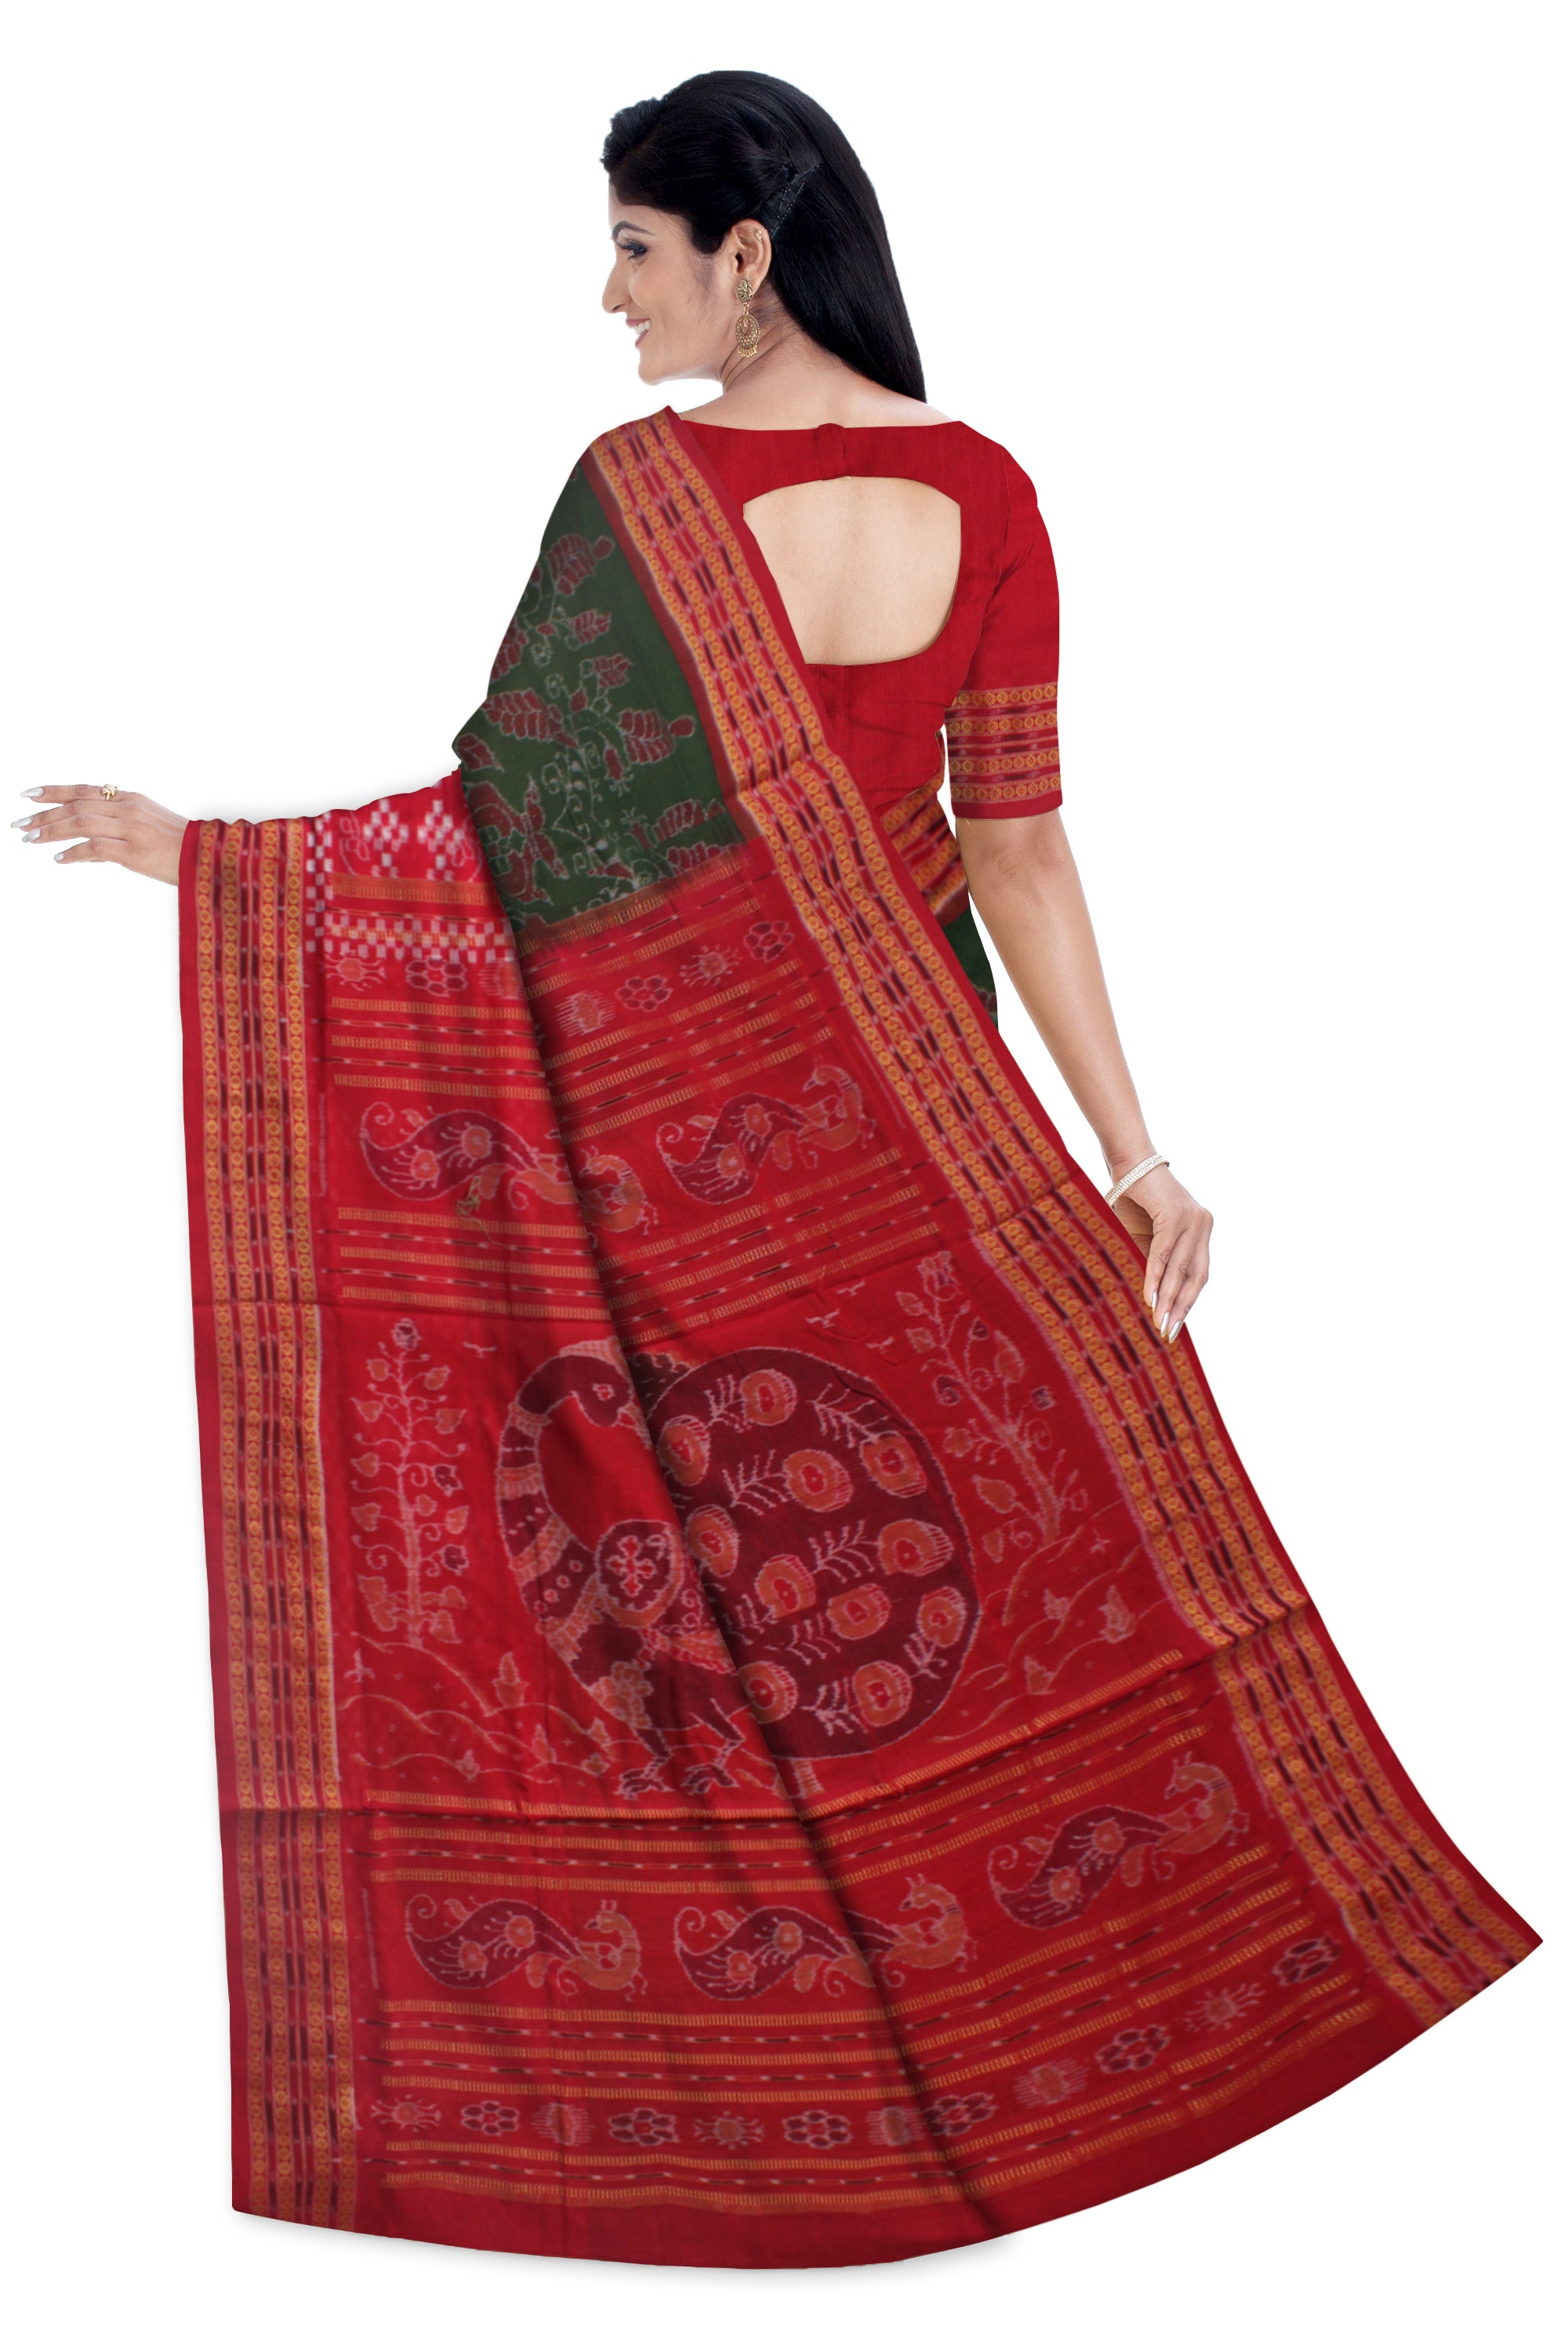 TRADITIONAL PASAPALI WITH PEACOCK PRINT PURE COTTON SAREE IS MEHENDI AND RED COLOR BASE,ATTACHED WITH MATCHING BLOUSE PIECE. - Koshali Arts & Crafts Enterprise